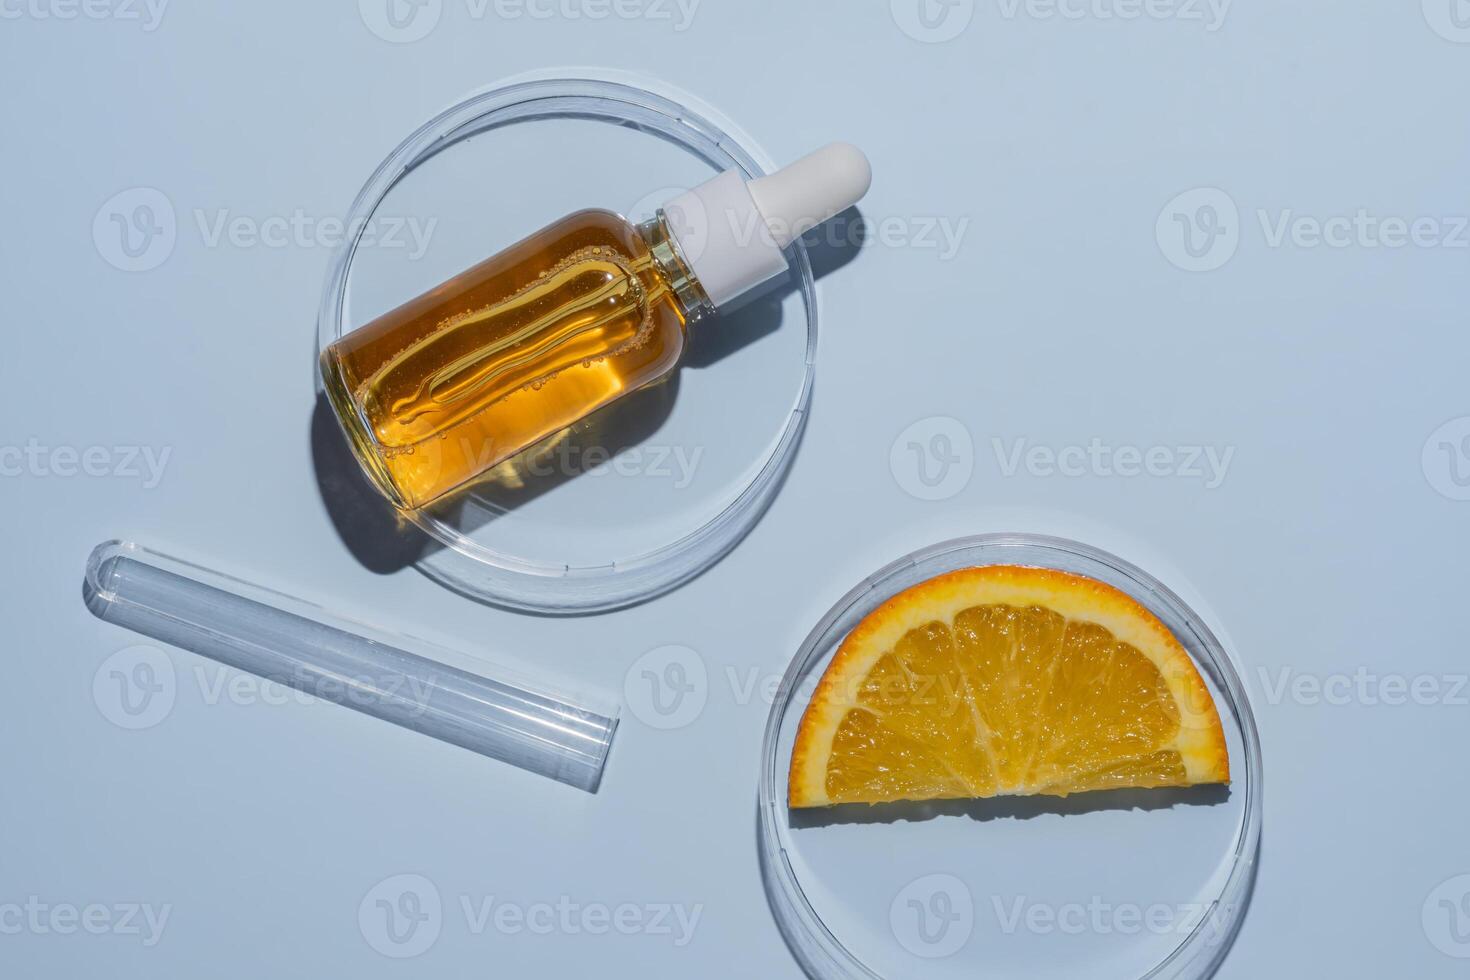 Dropper bottle with orange serum with vitamin C in a petri dish next to orange slice and a test tube. Laboratory cosmetics research, antioxidant testing. Skin care photo